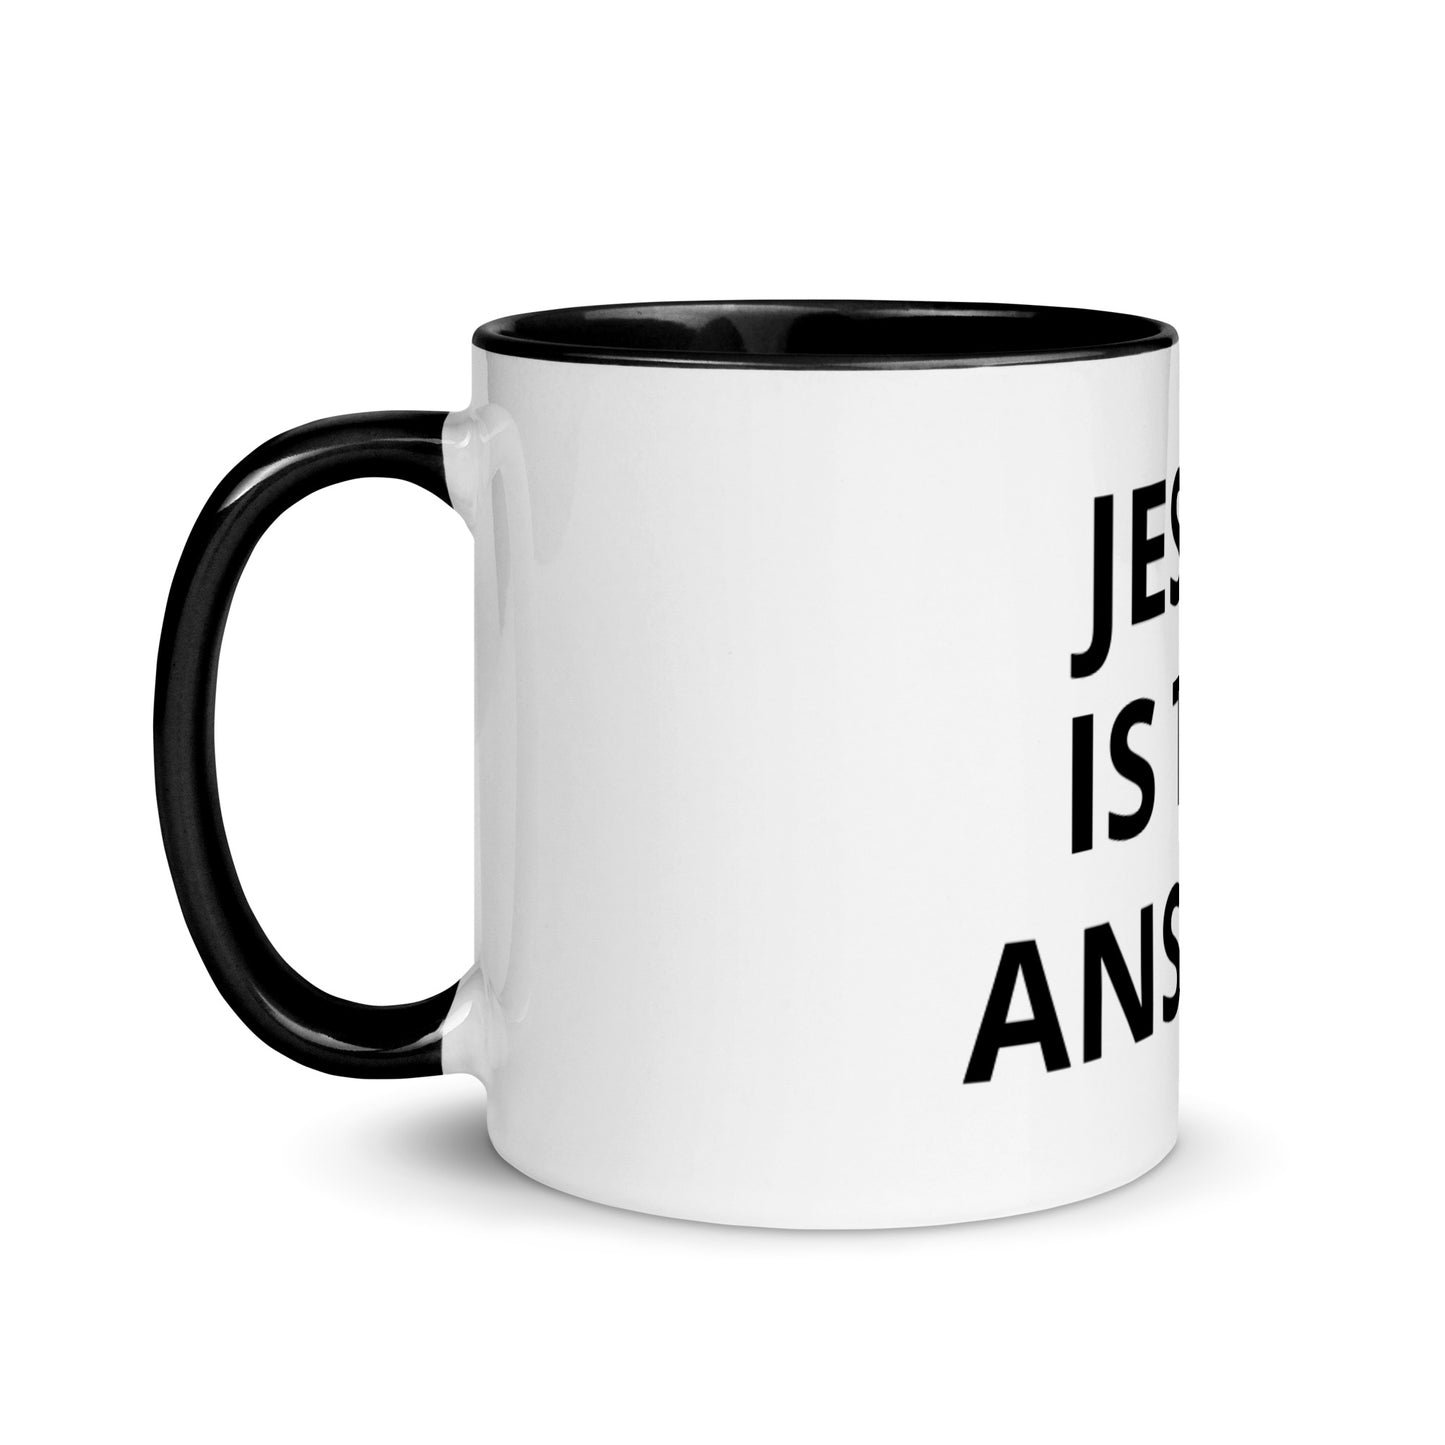 Jesus Is The Answer White Ceramic Mug with Color Inside